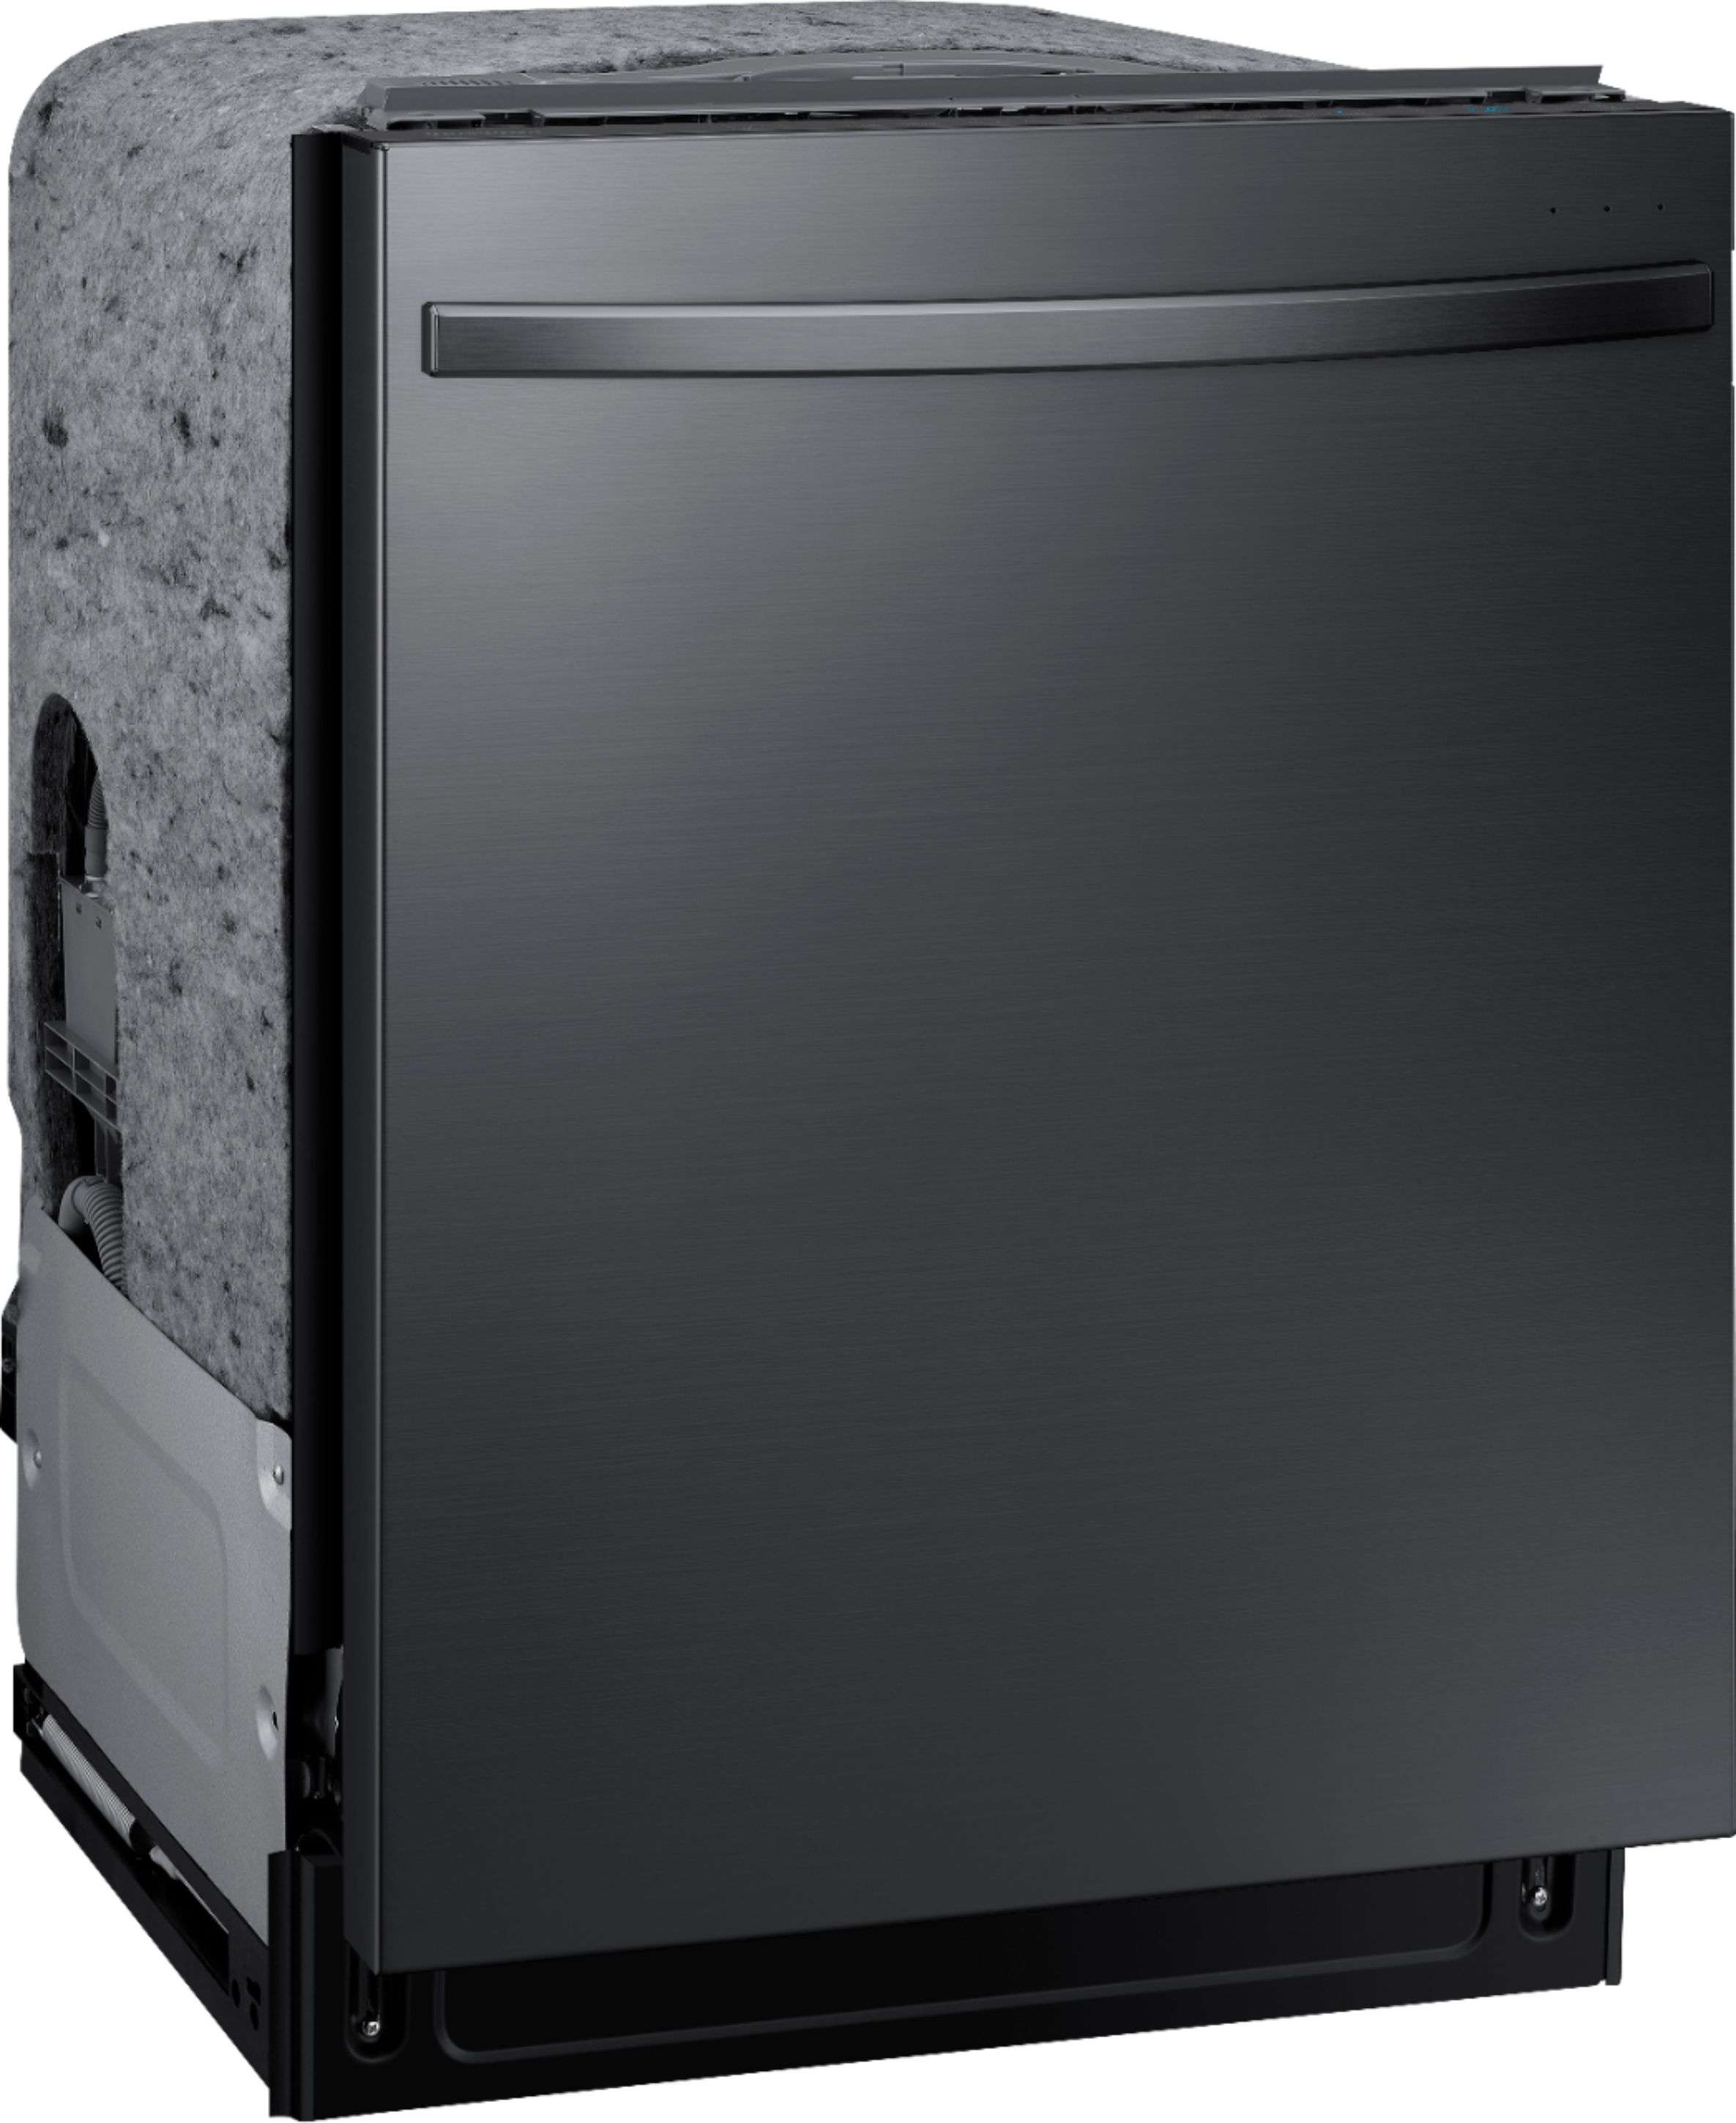 Angle View: Samsung - StormWash 24" Top Control Built-In Dishwasher with AutoRelease Dry, 3rd Rack, 42 dBA - Black stainless steel